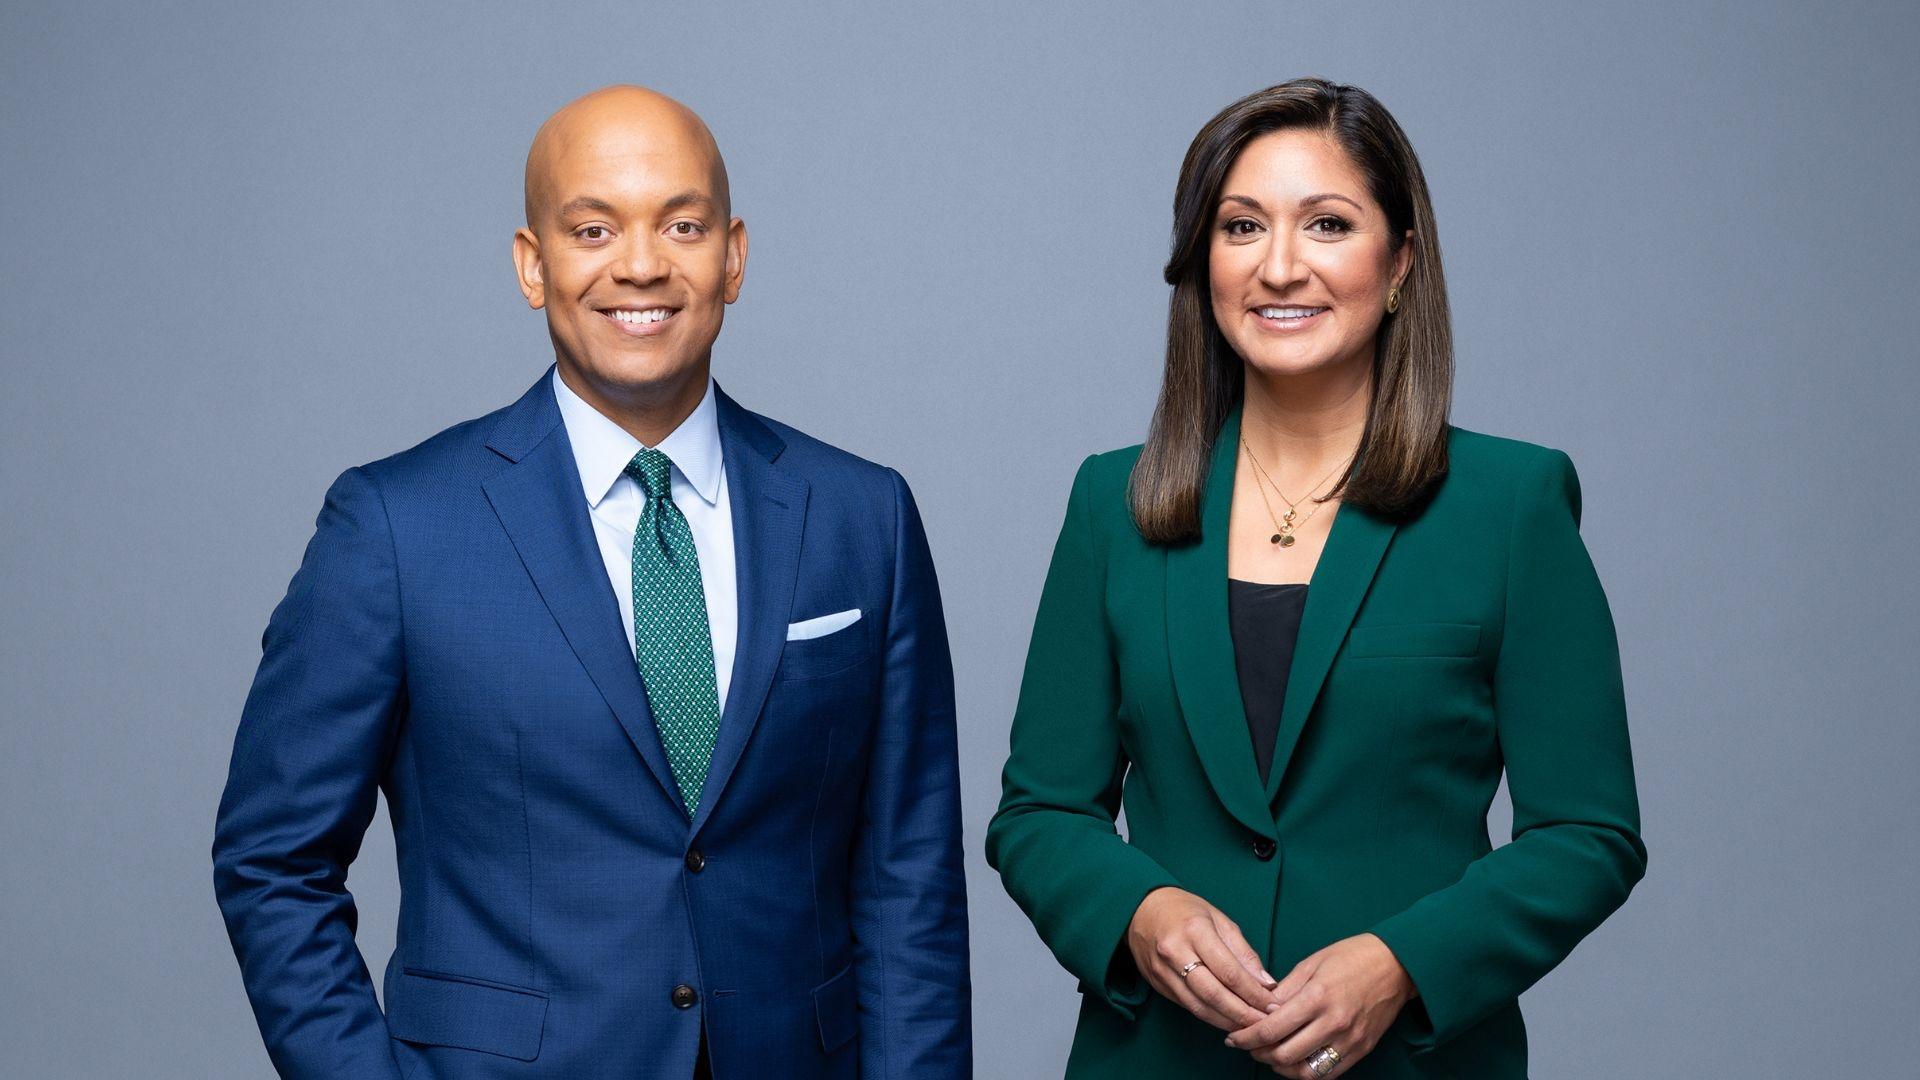 Hosts of PBS NewsHour, Geoff Bennett and Amna Nawaz stand in front of a grey background.